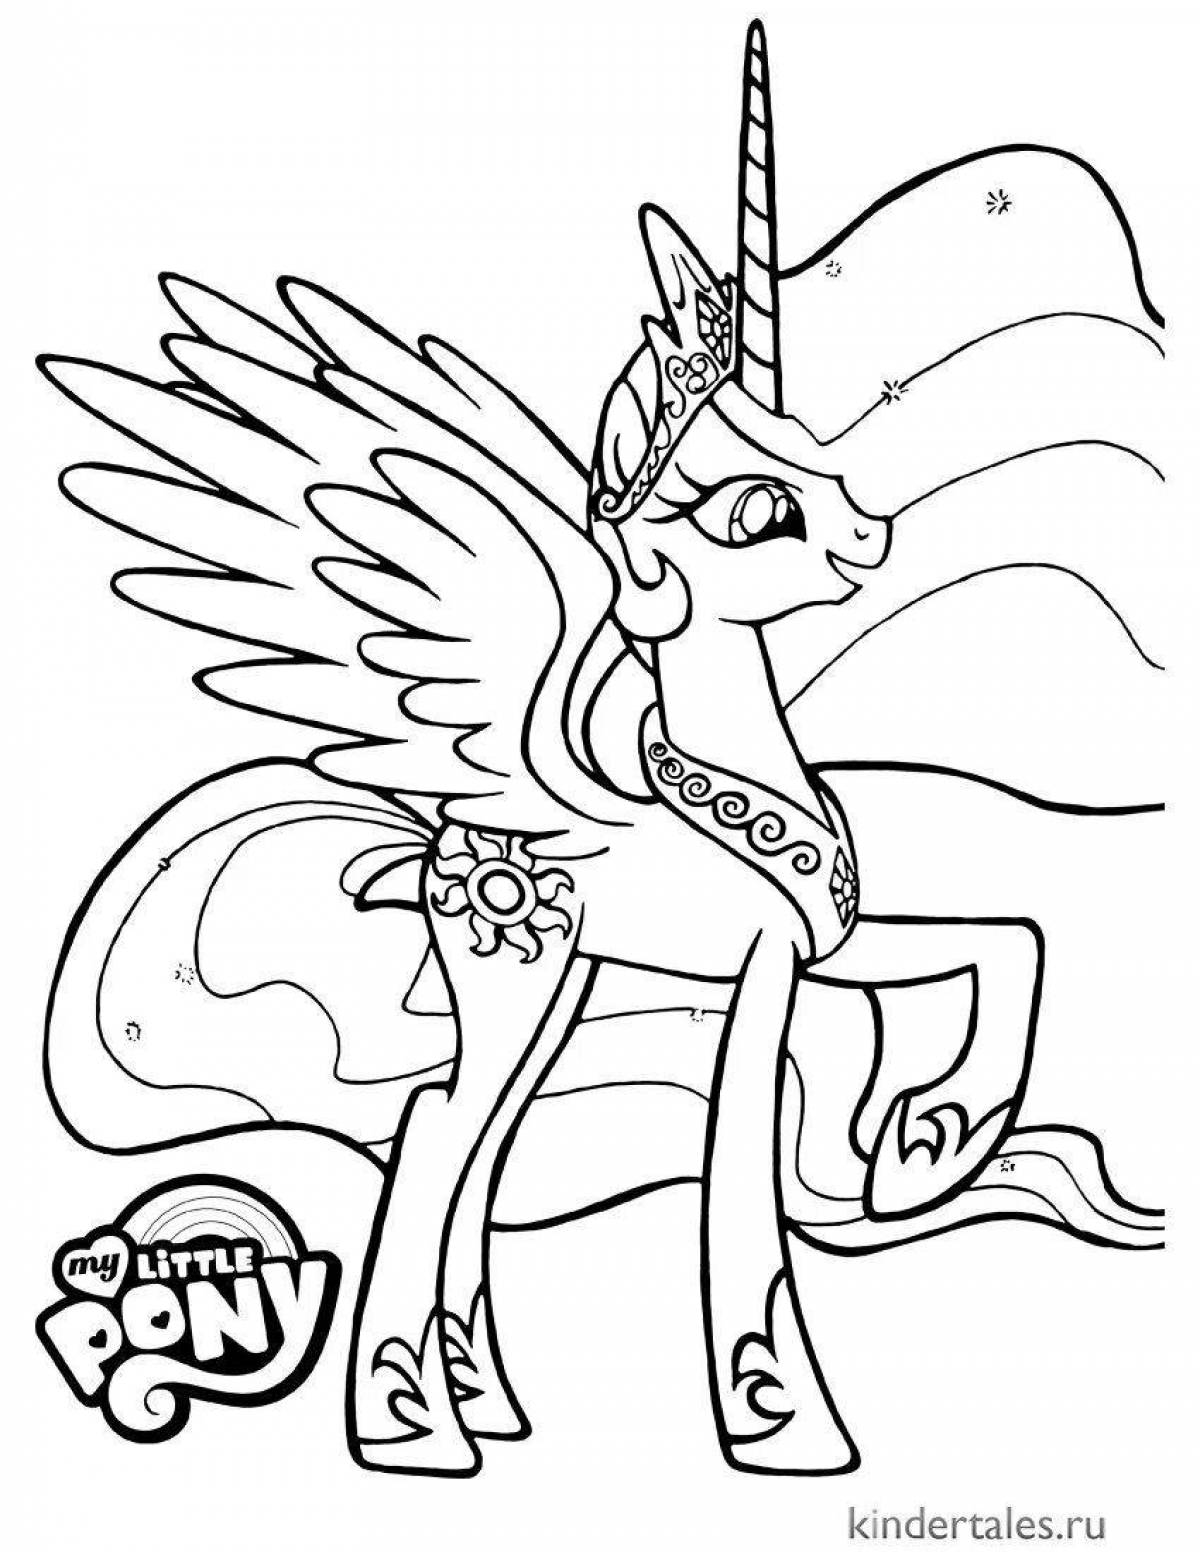 Brilliant celestia coloring pages for kids